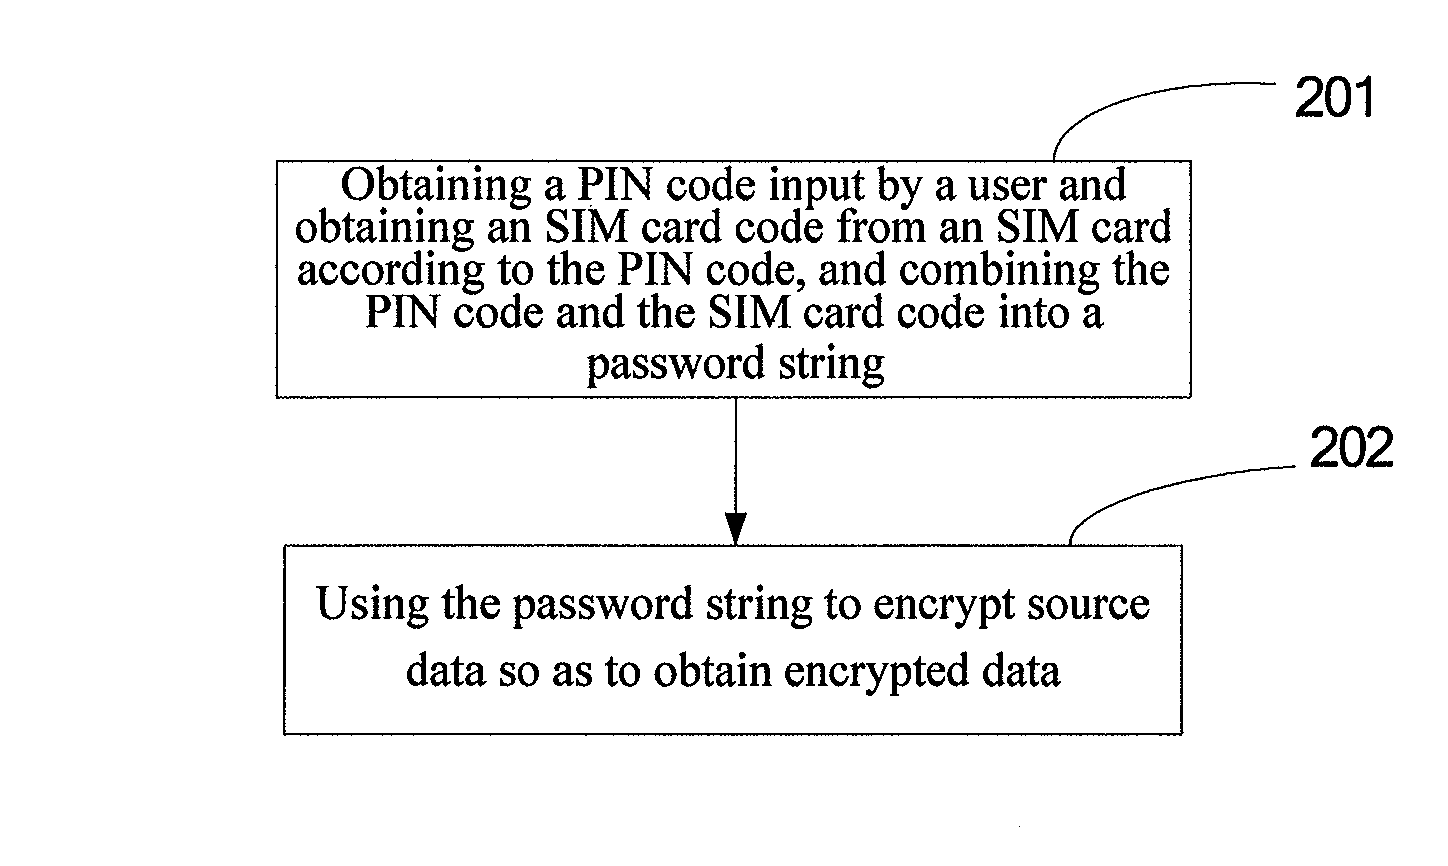 Data-encrypting method and decrypting method for a mobile phone